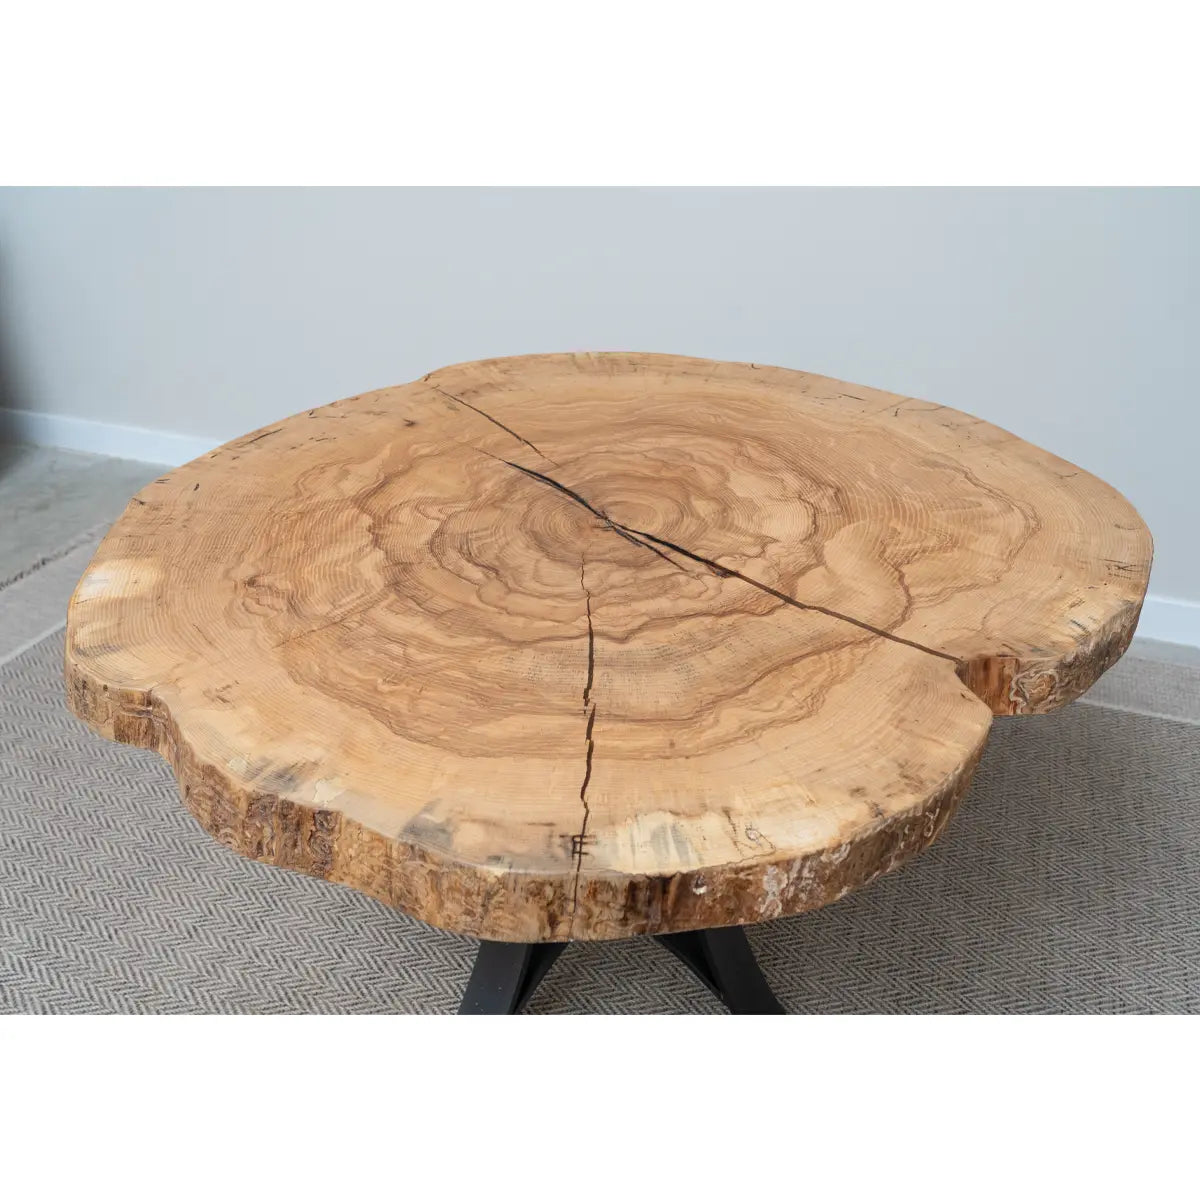 46" Live Edge Ash Round Cafe Table